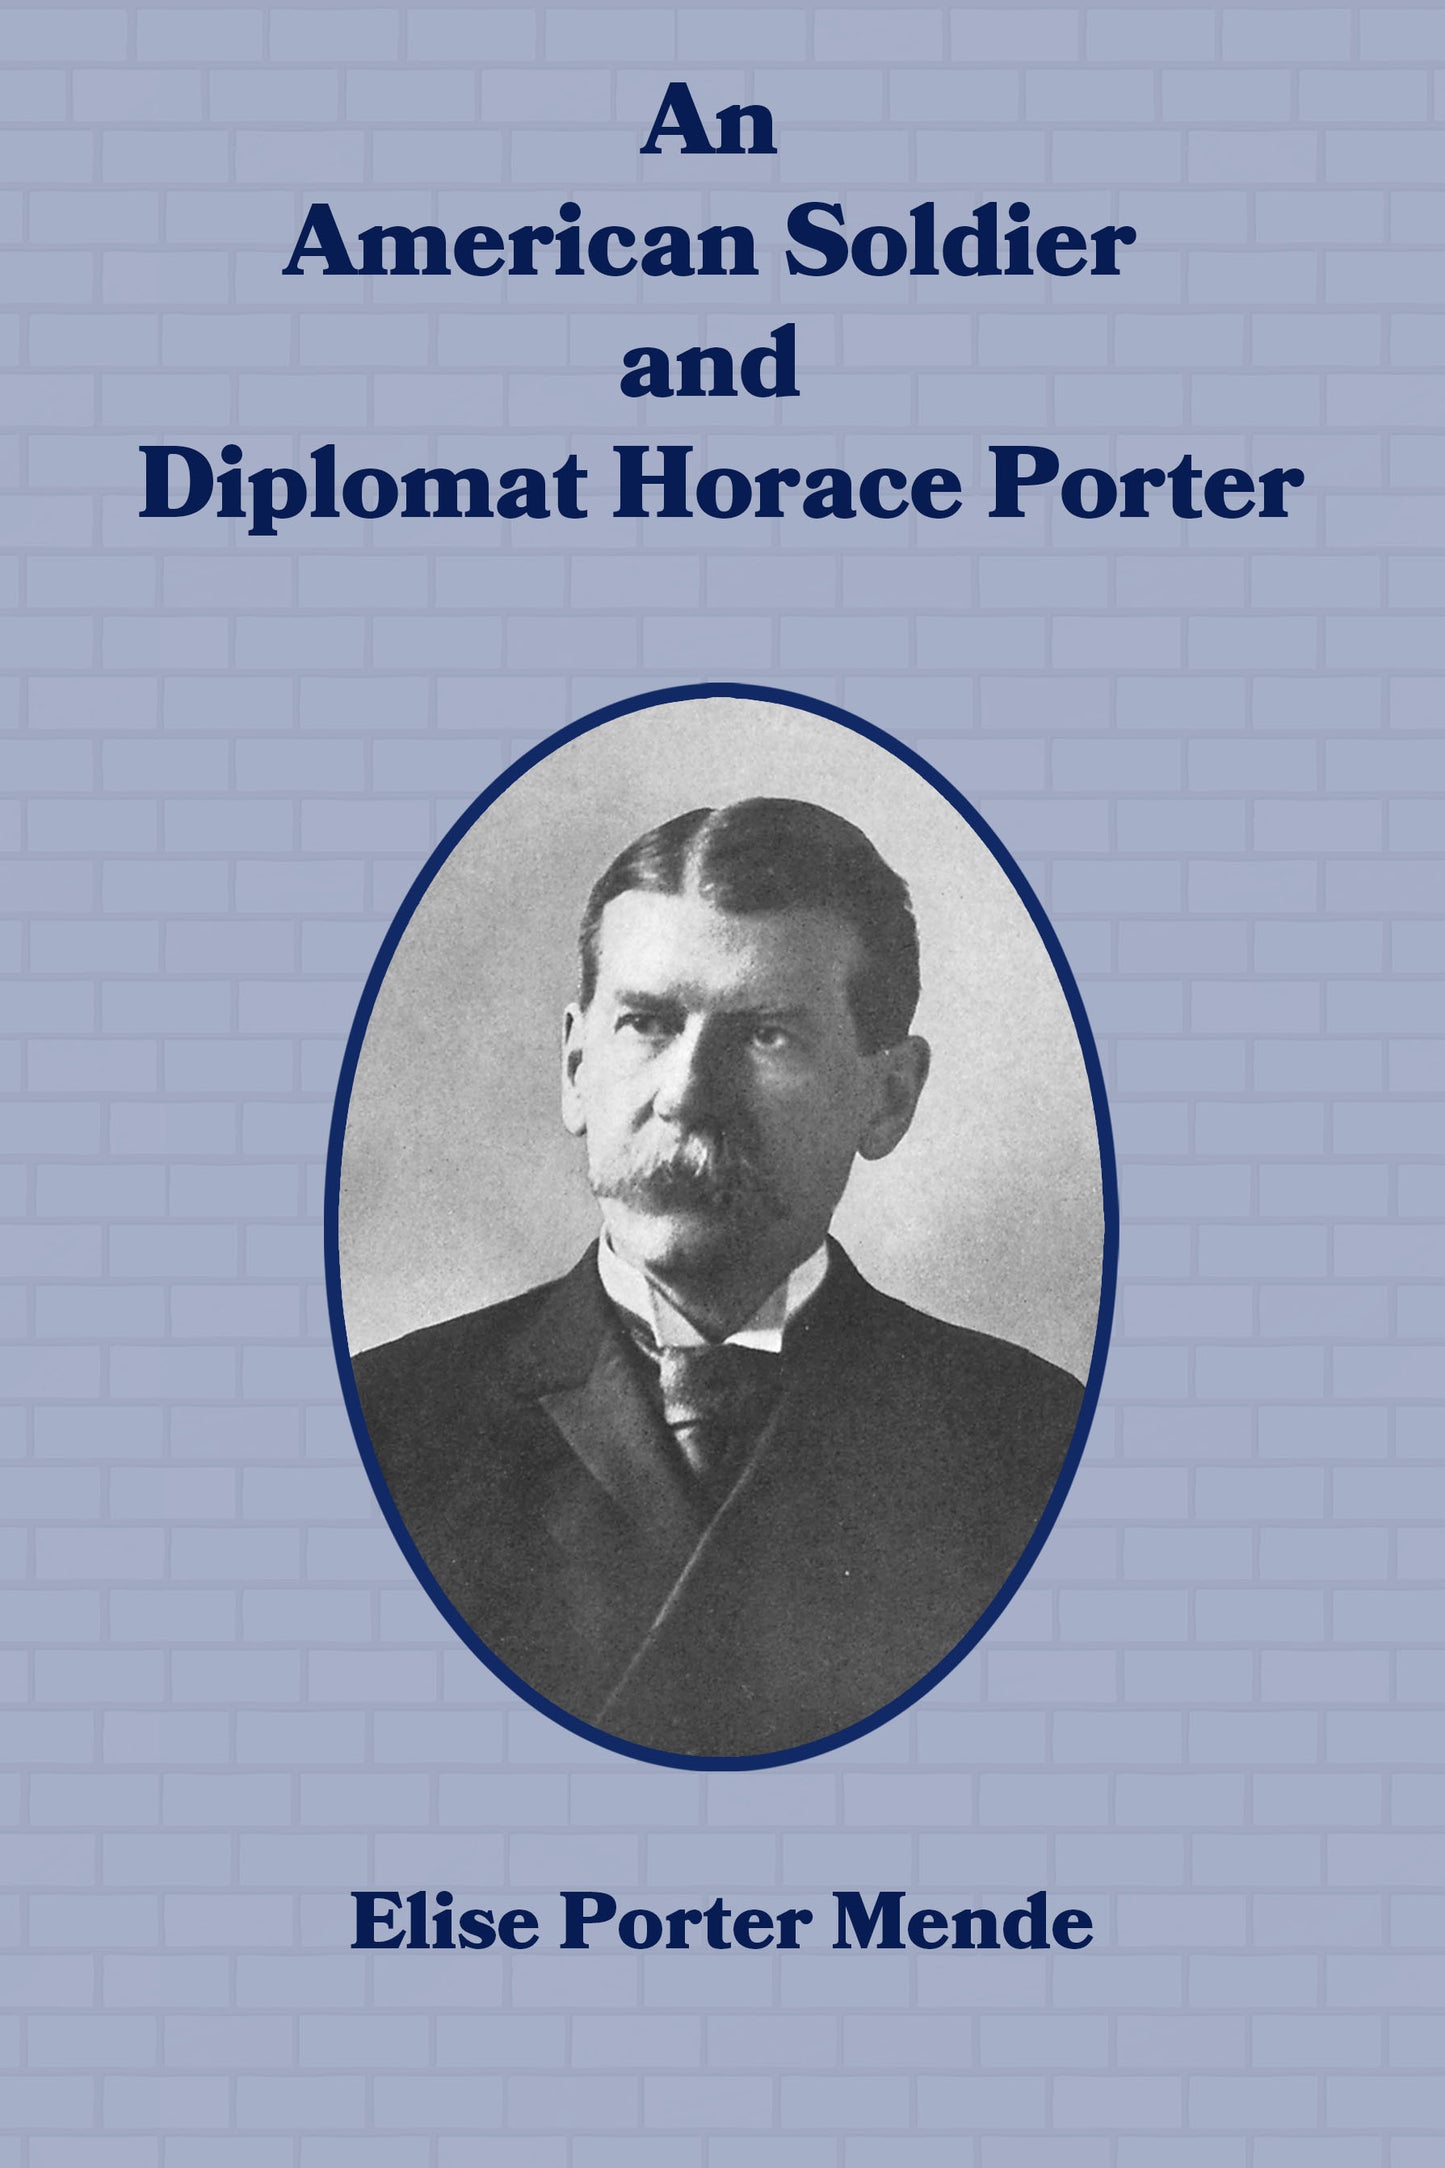 An American Soldier and Diplomat Horace Porter